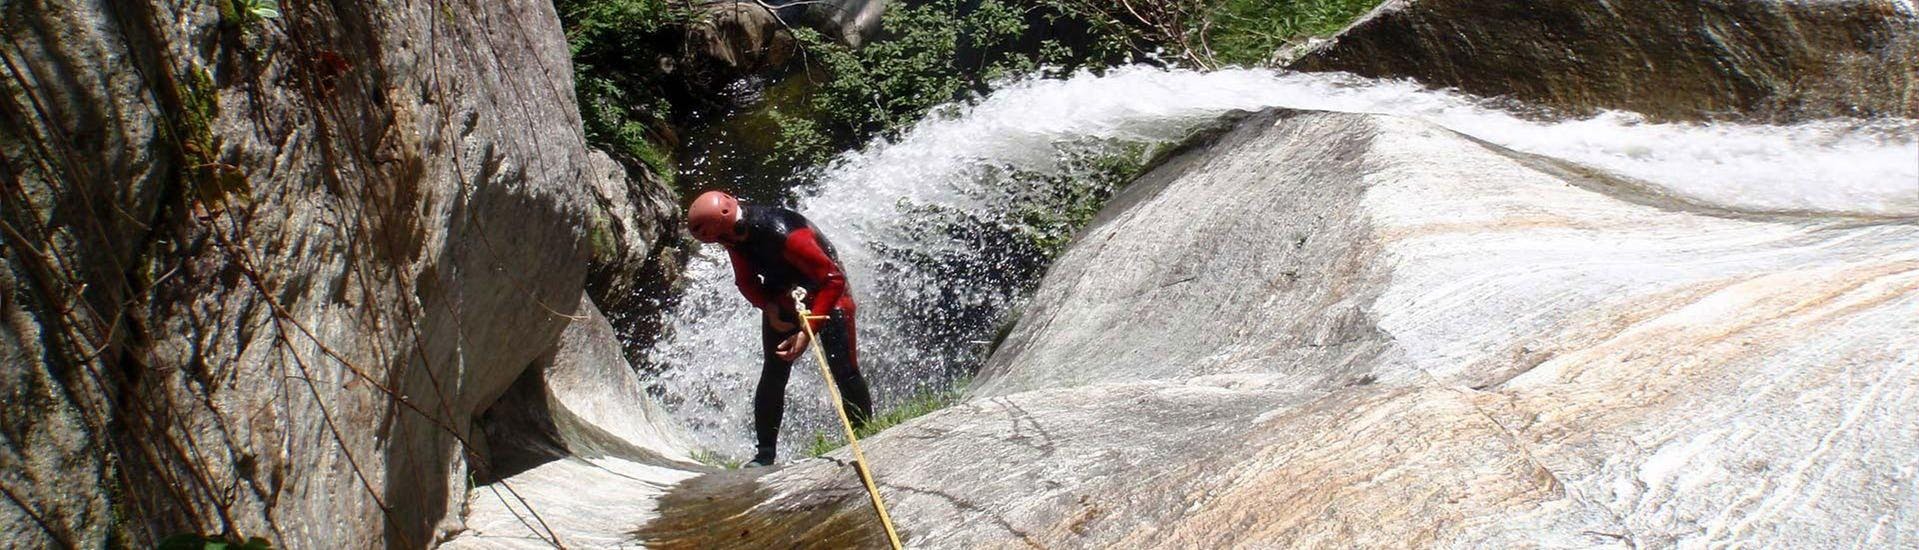 Leichte Canyoning-Tour in Campertogno - Sorba.